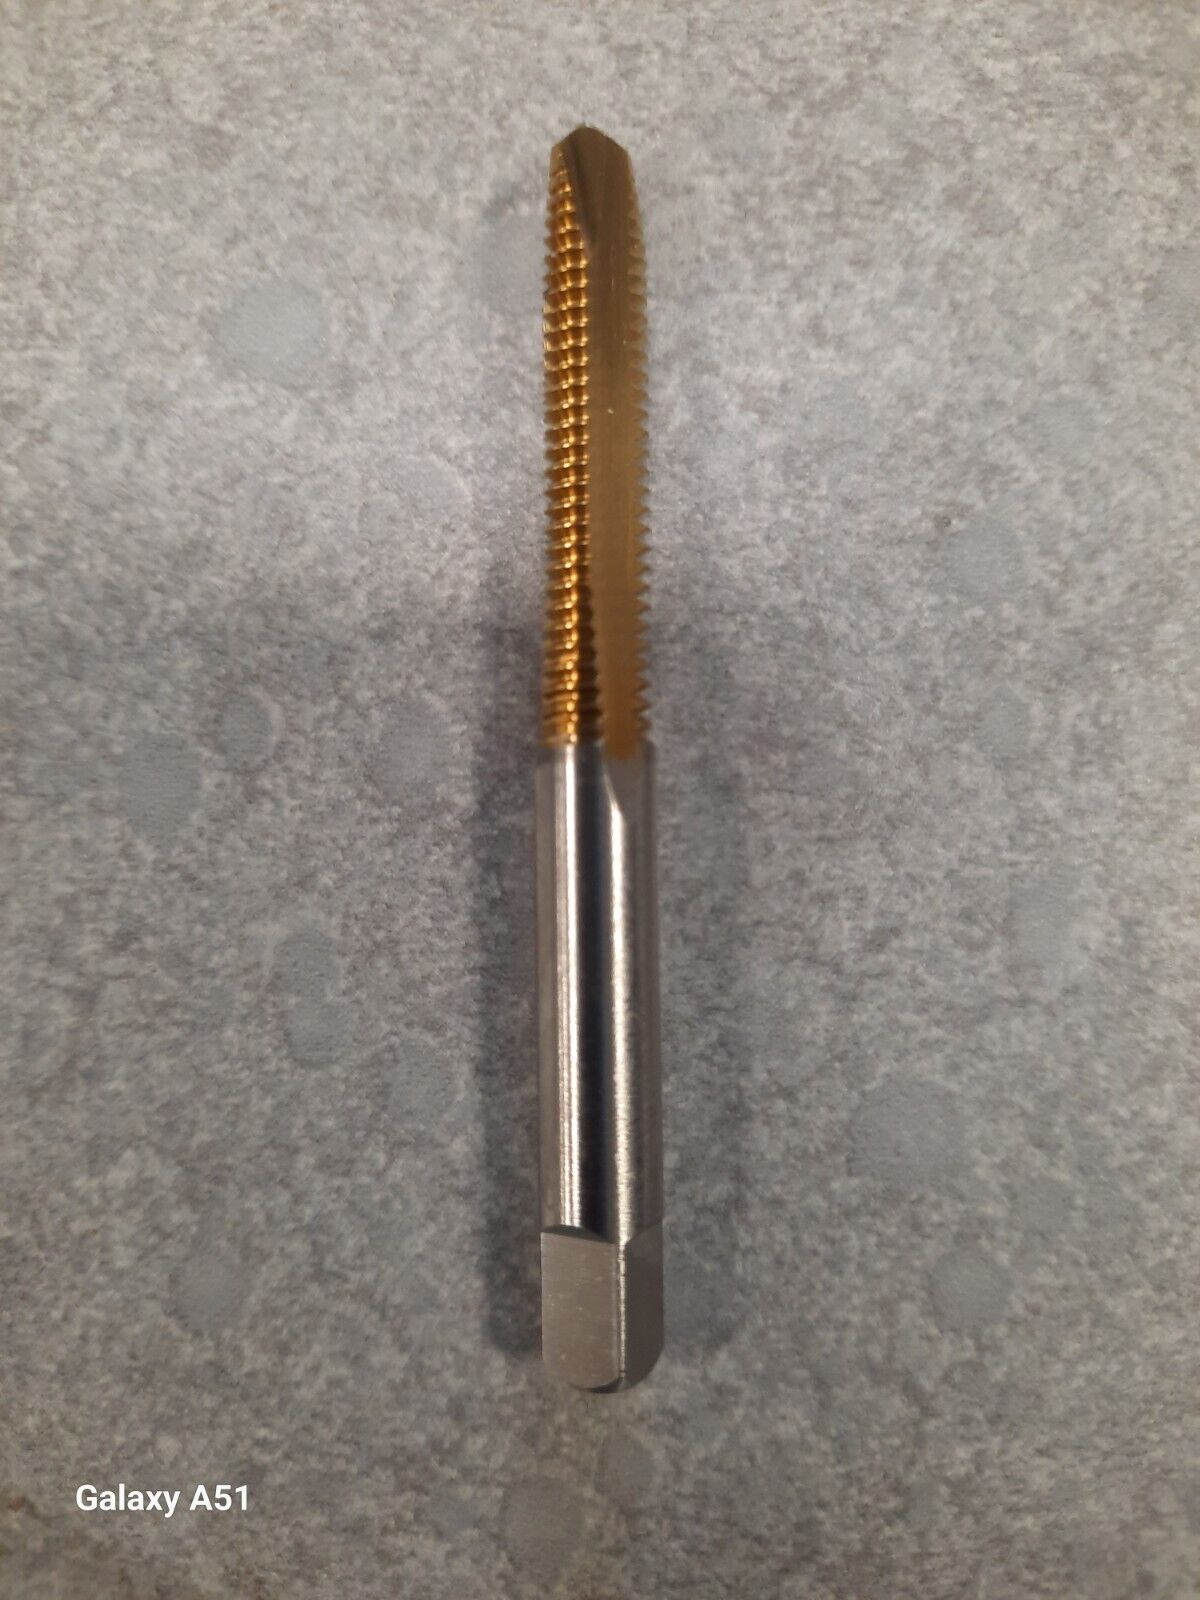 Union Butterfield M6 x 1.0 GH7 SPPT PL TIN Coated Tap